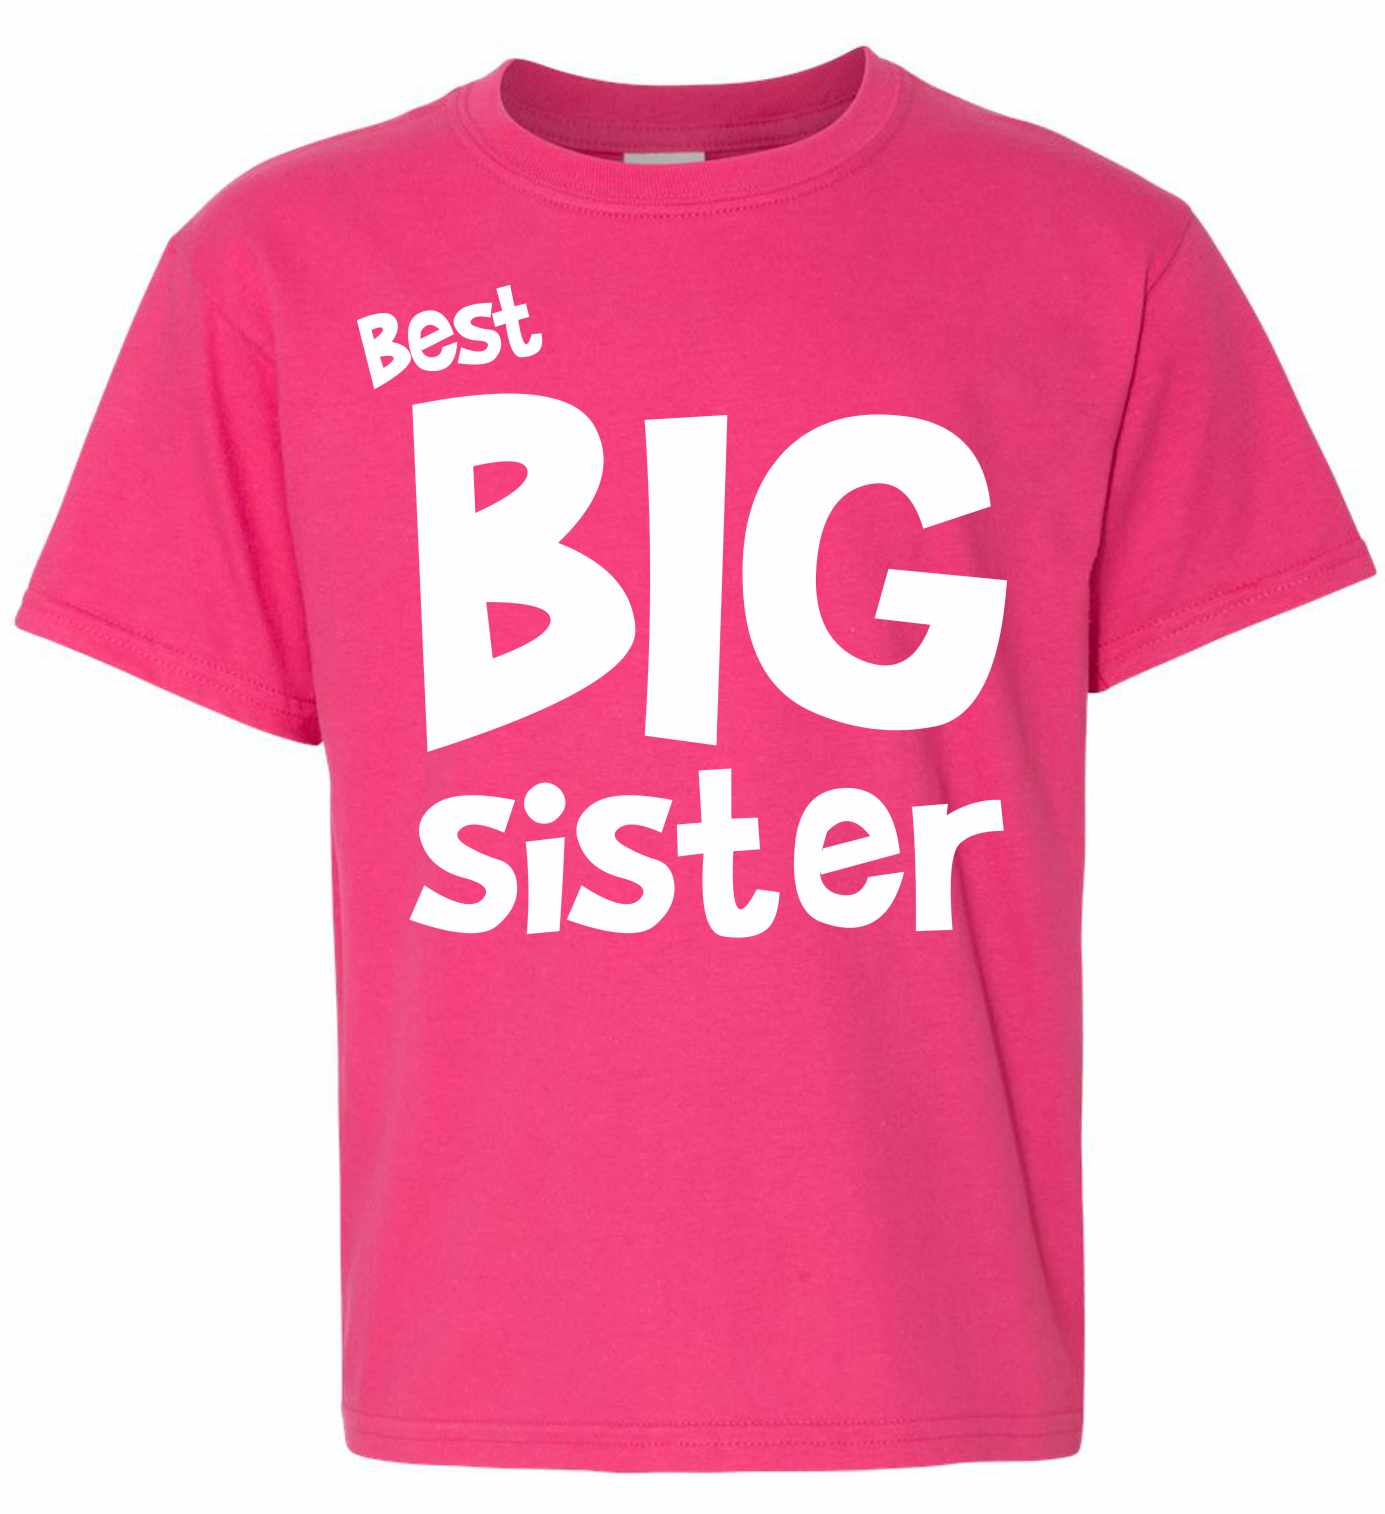 Best Big Sister on Youth T-Shirt